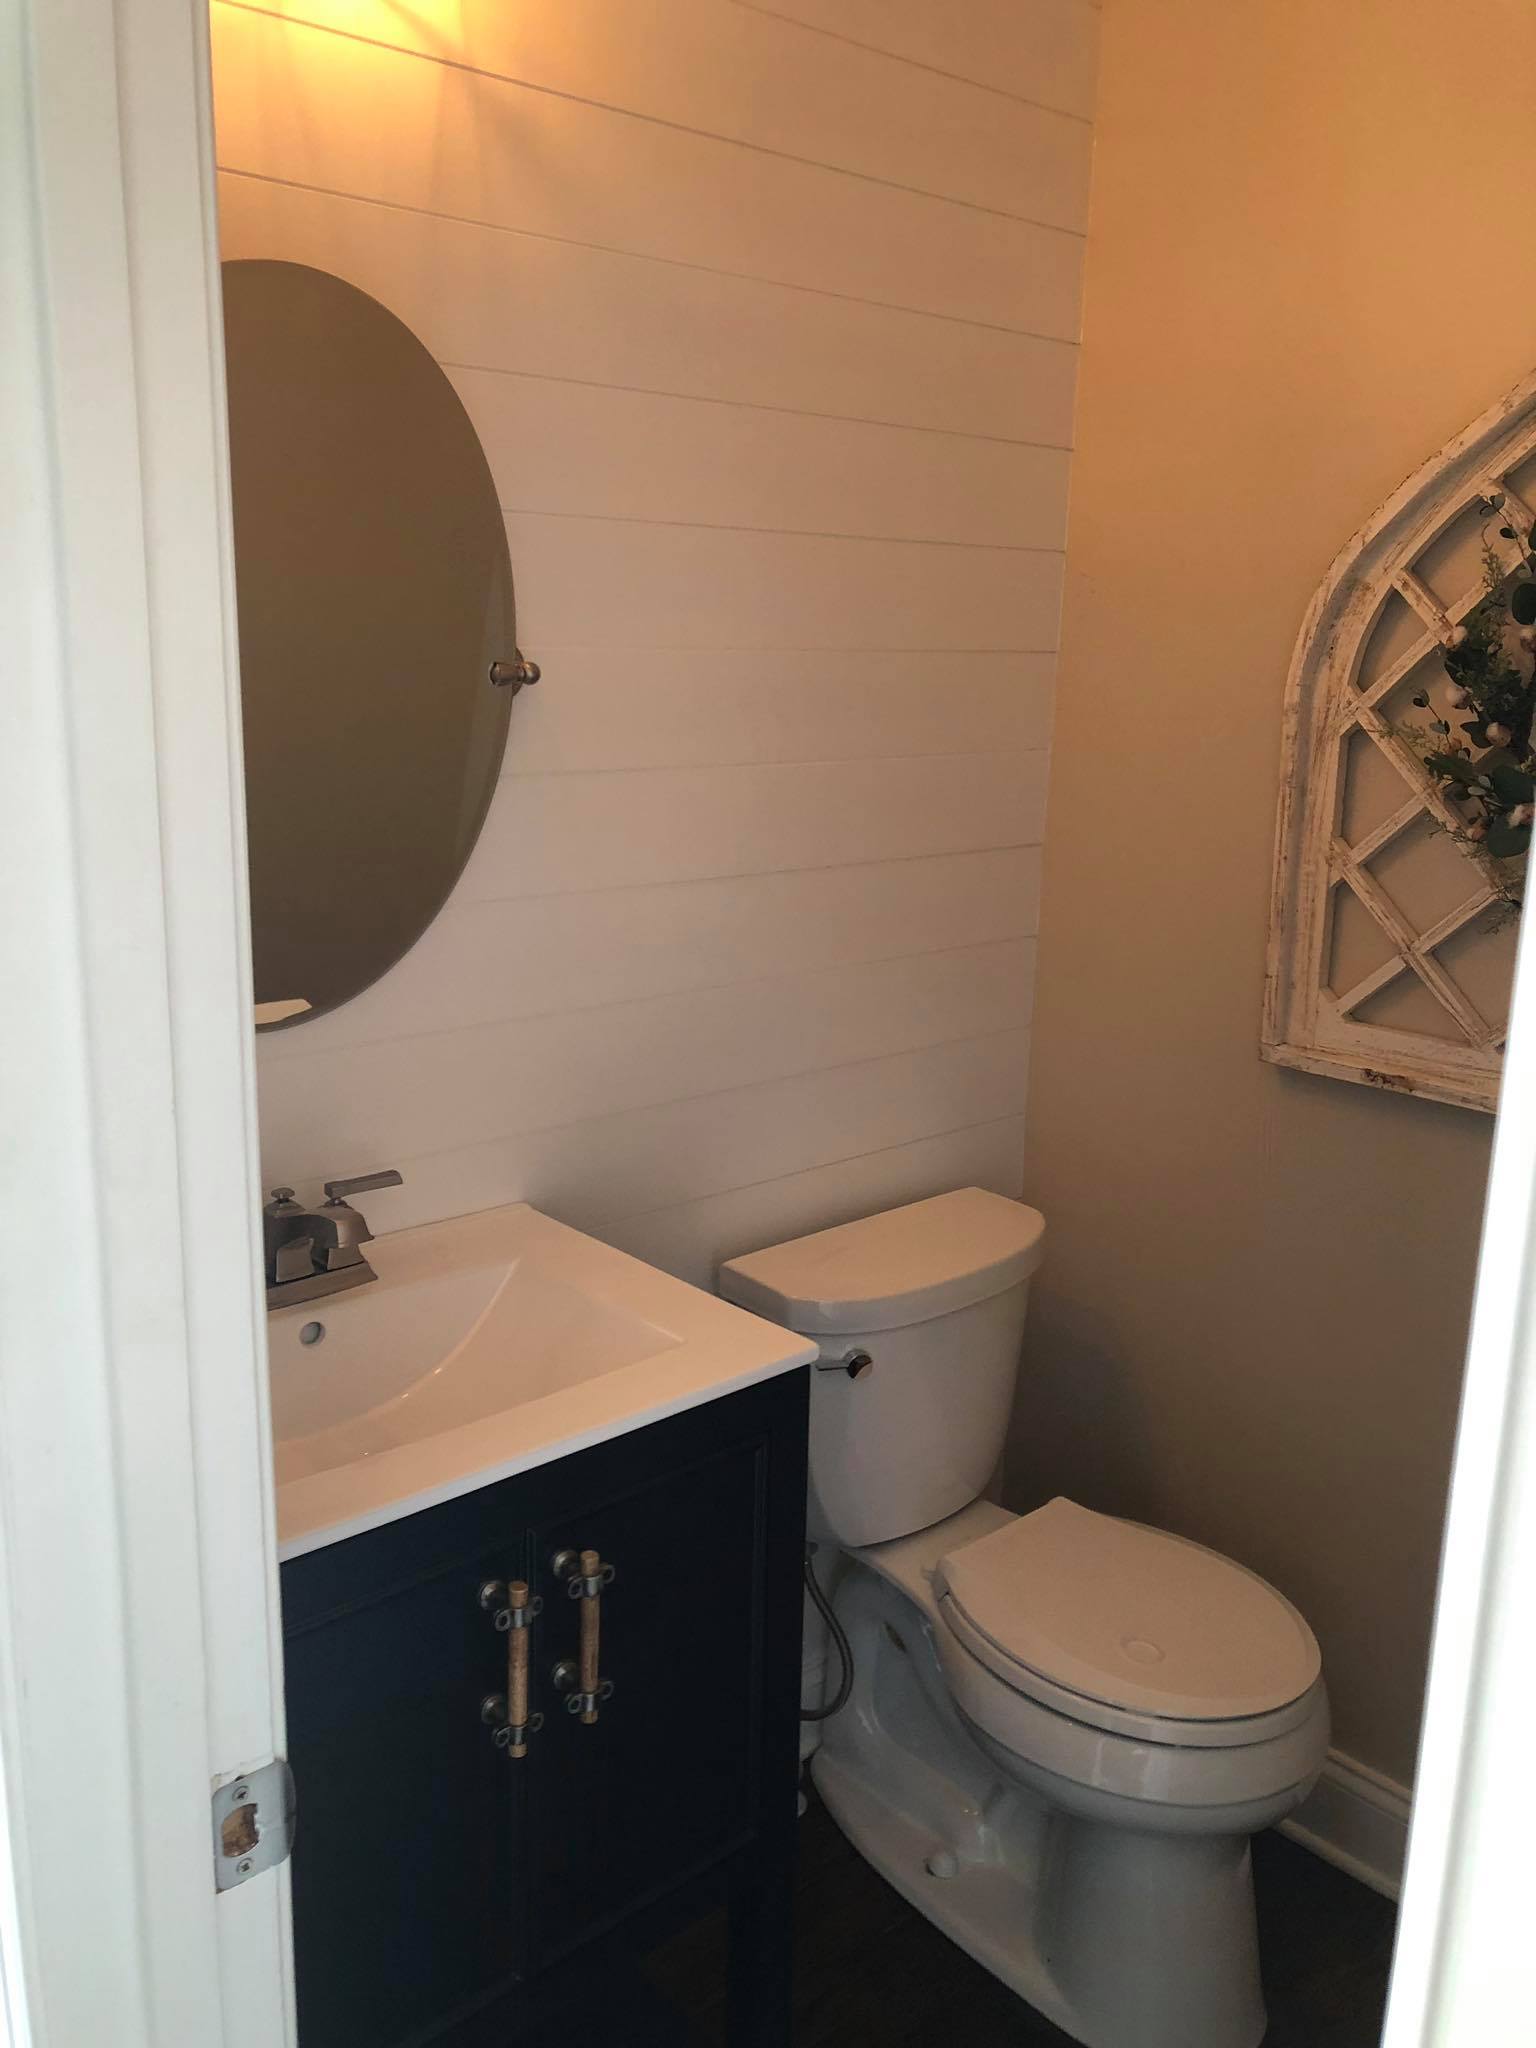 Shiplap Installation in Bathroom Walls 3 painted White